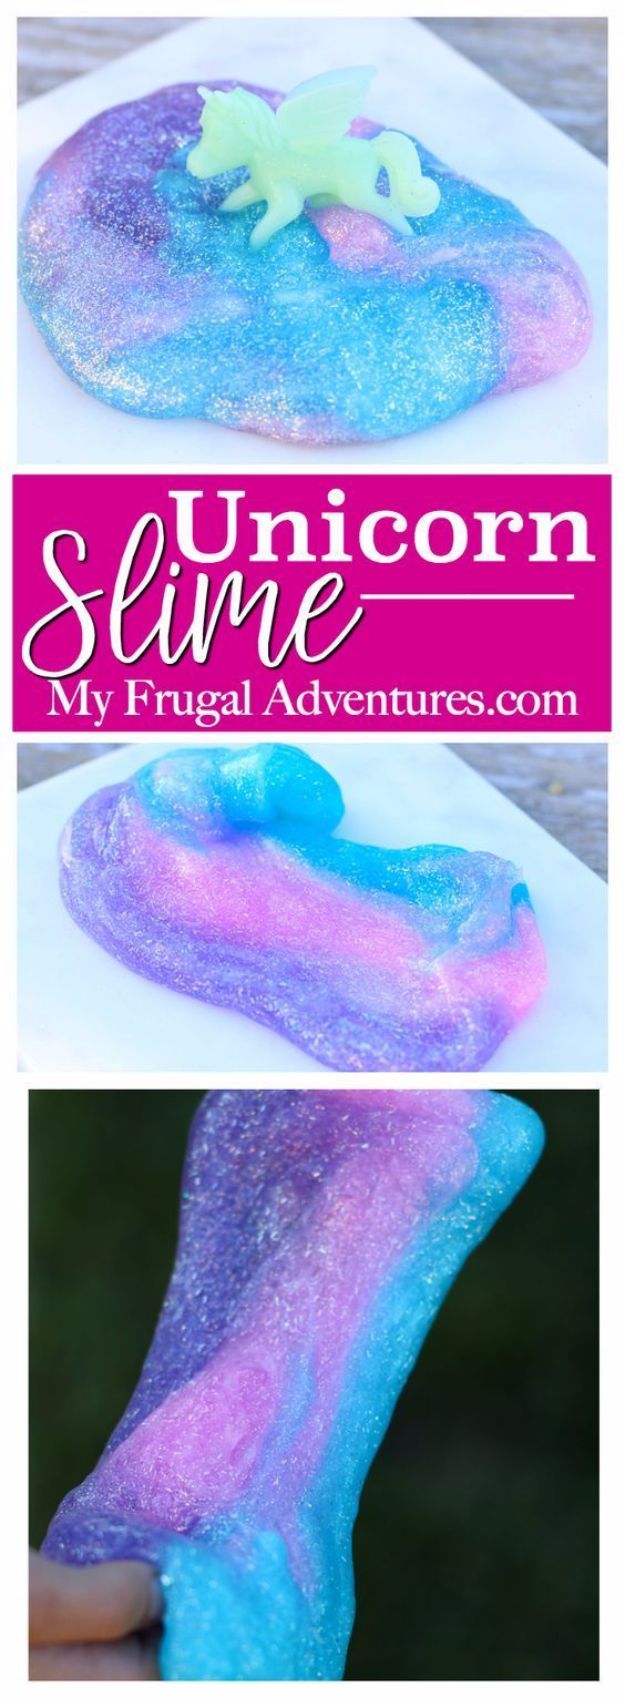 DIY Ideas With Unicorns - Easy Unicorn Slime - Cute and Easy DIY Projects for Unicorn Lovers - Wall and Home Decor Projects, Things To Make and Sell on Etsy - Quick Gifts to Make for Friends and Family - Homemade No Sew Projects and Pillows - Fun Jewelry, Desk Decor Cool Clothes and Accessories